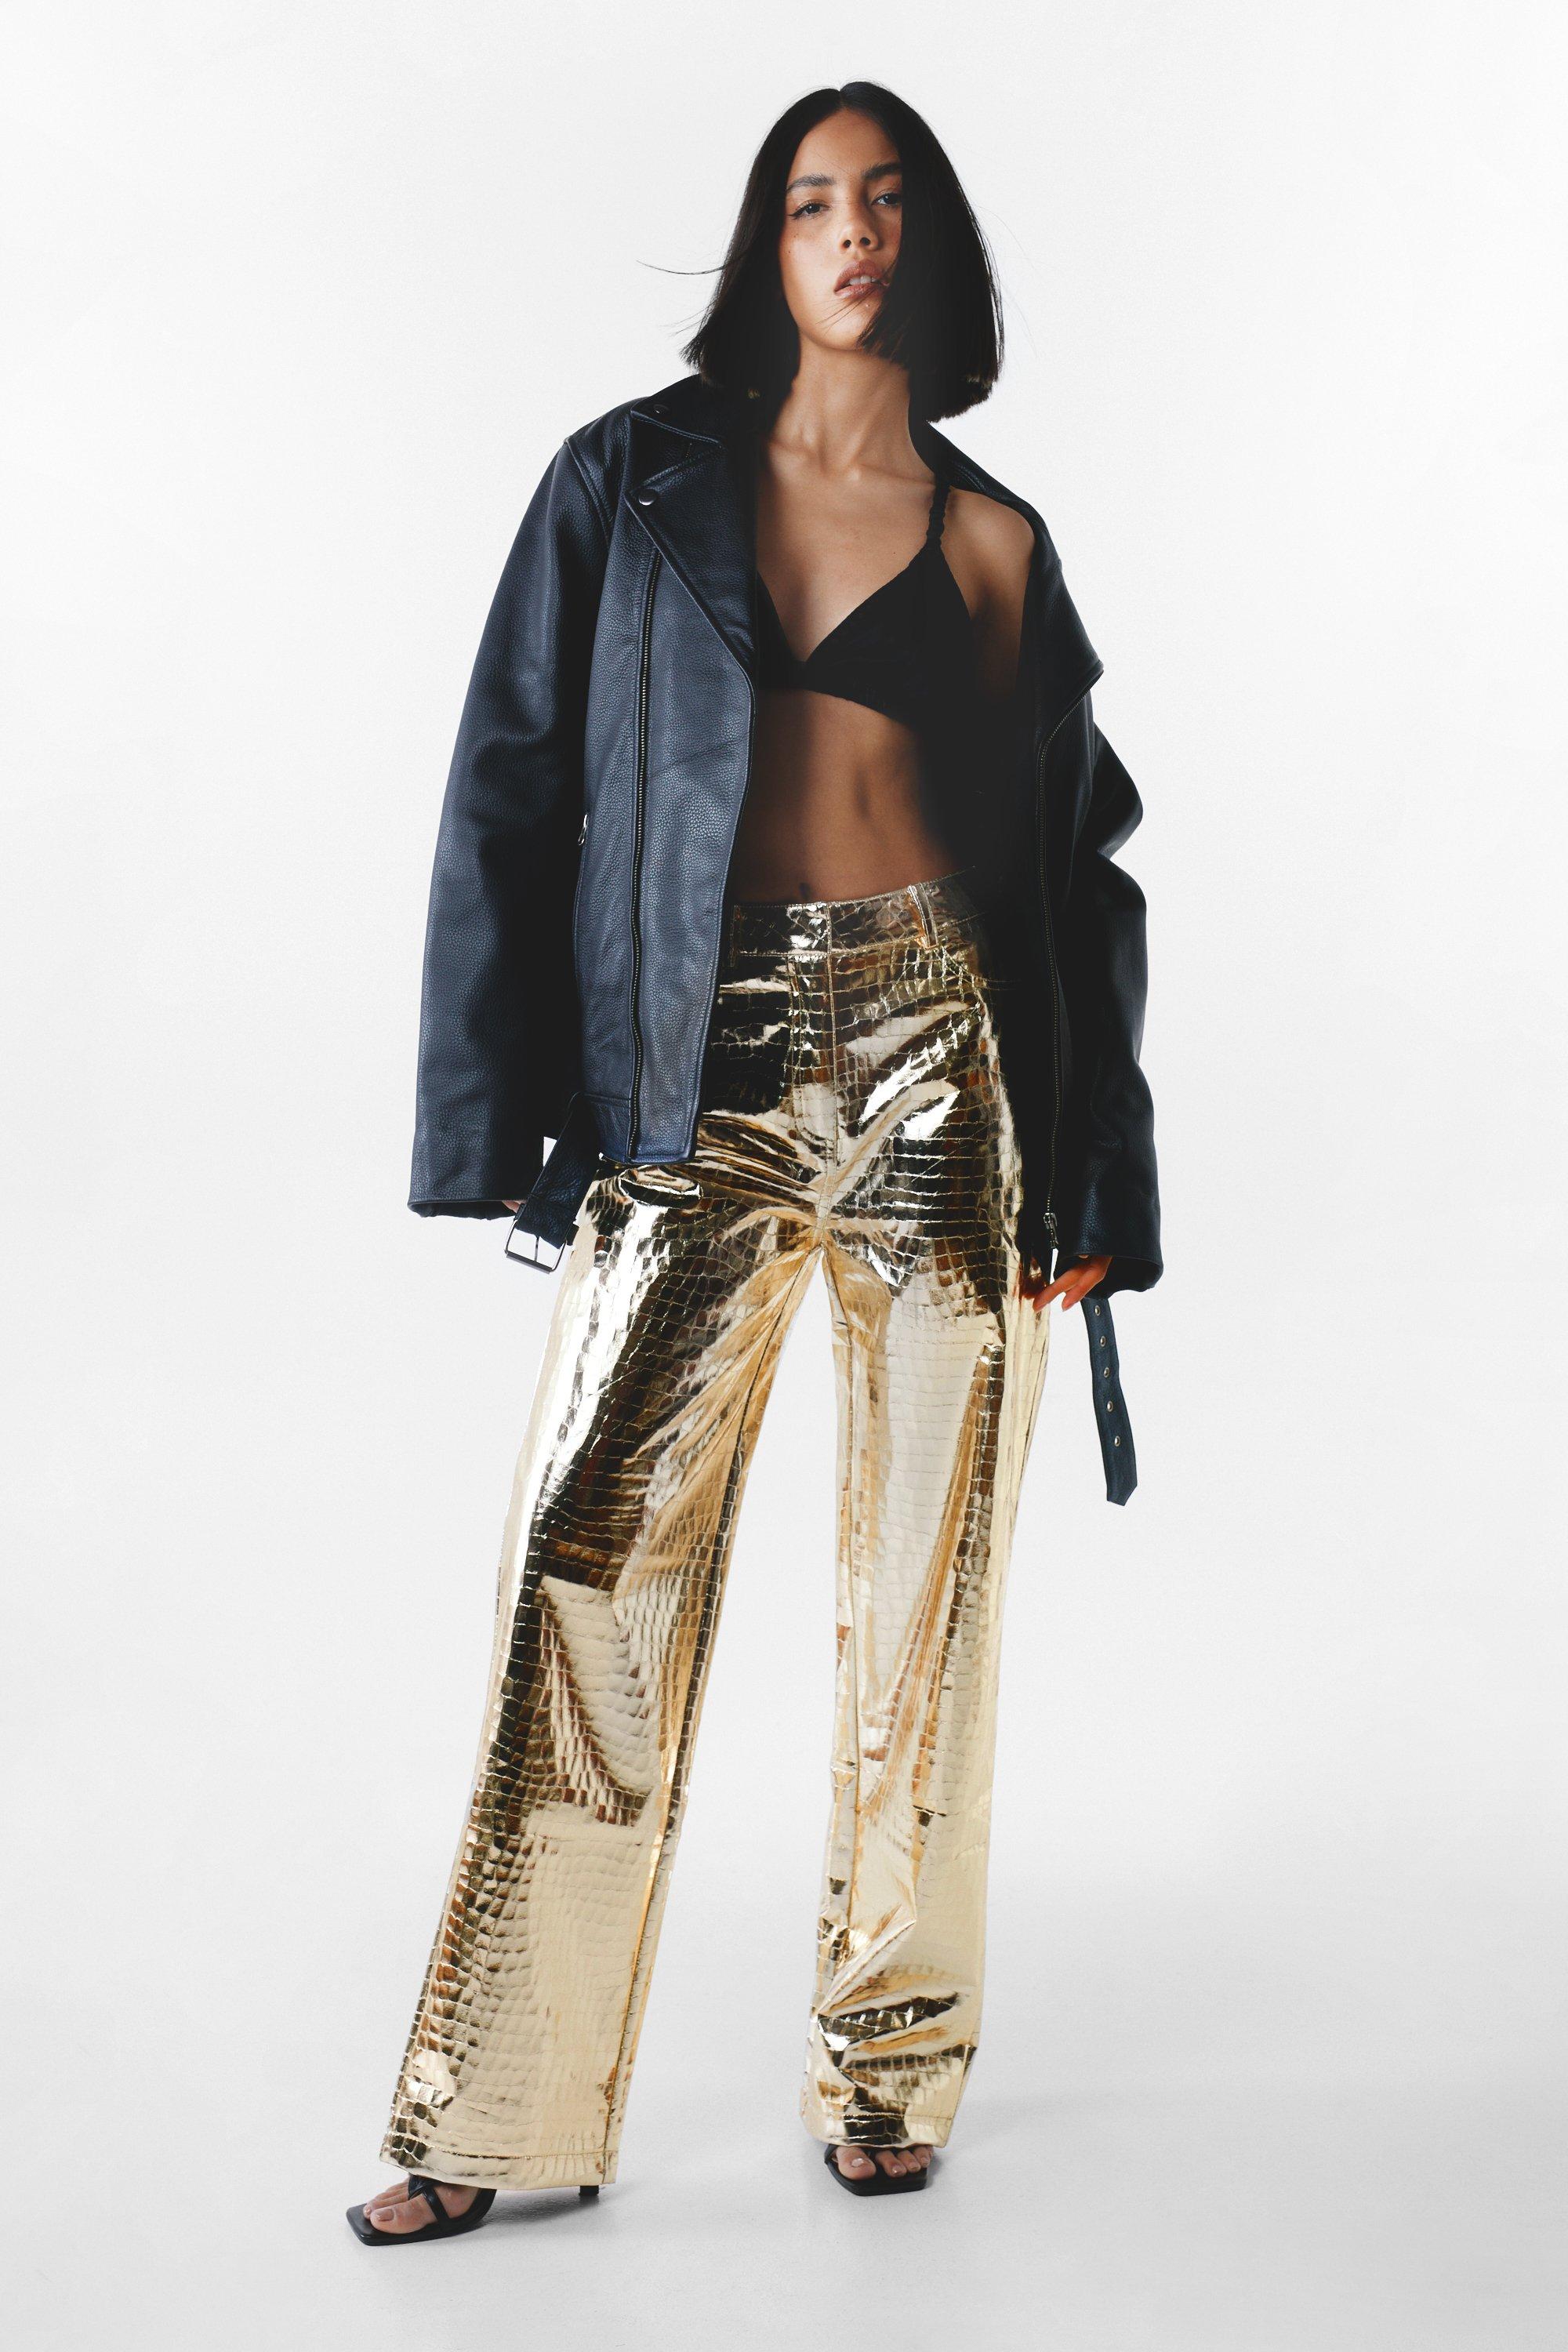 YYDGH Shiny Metallic Pants for Women Elastic High Waist Wide Leg Pants 70s  Disco Dance Party Trousers with Pockets Gold Gold - Walmart.com